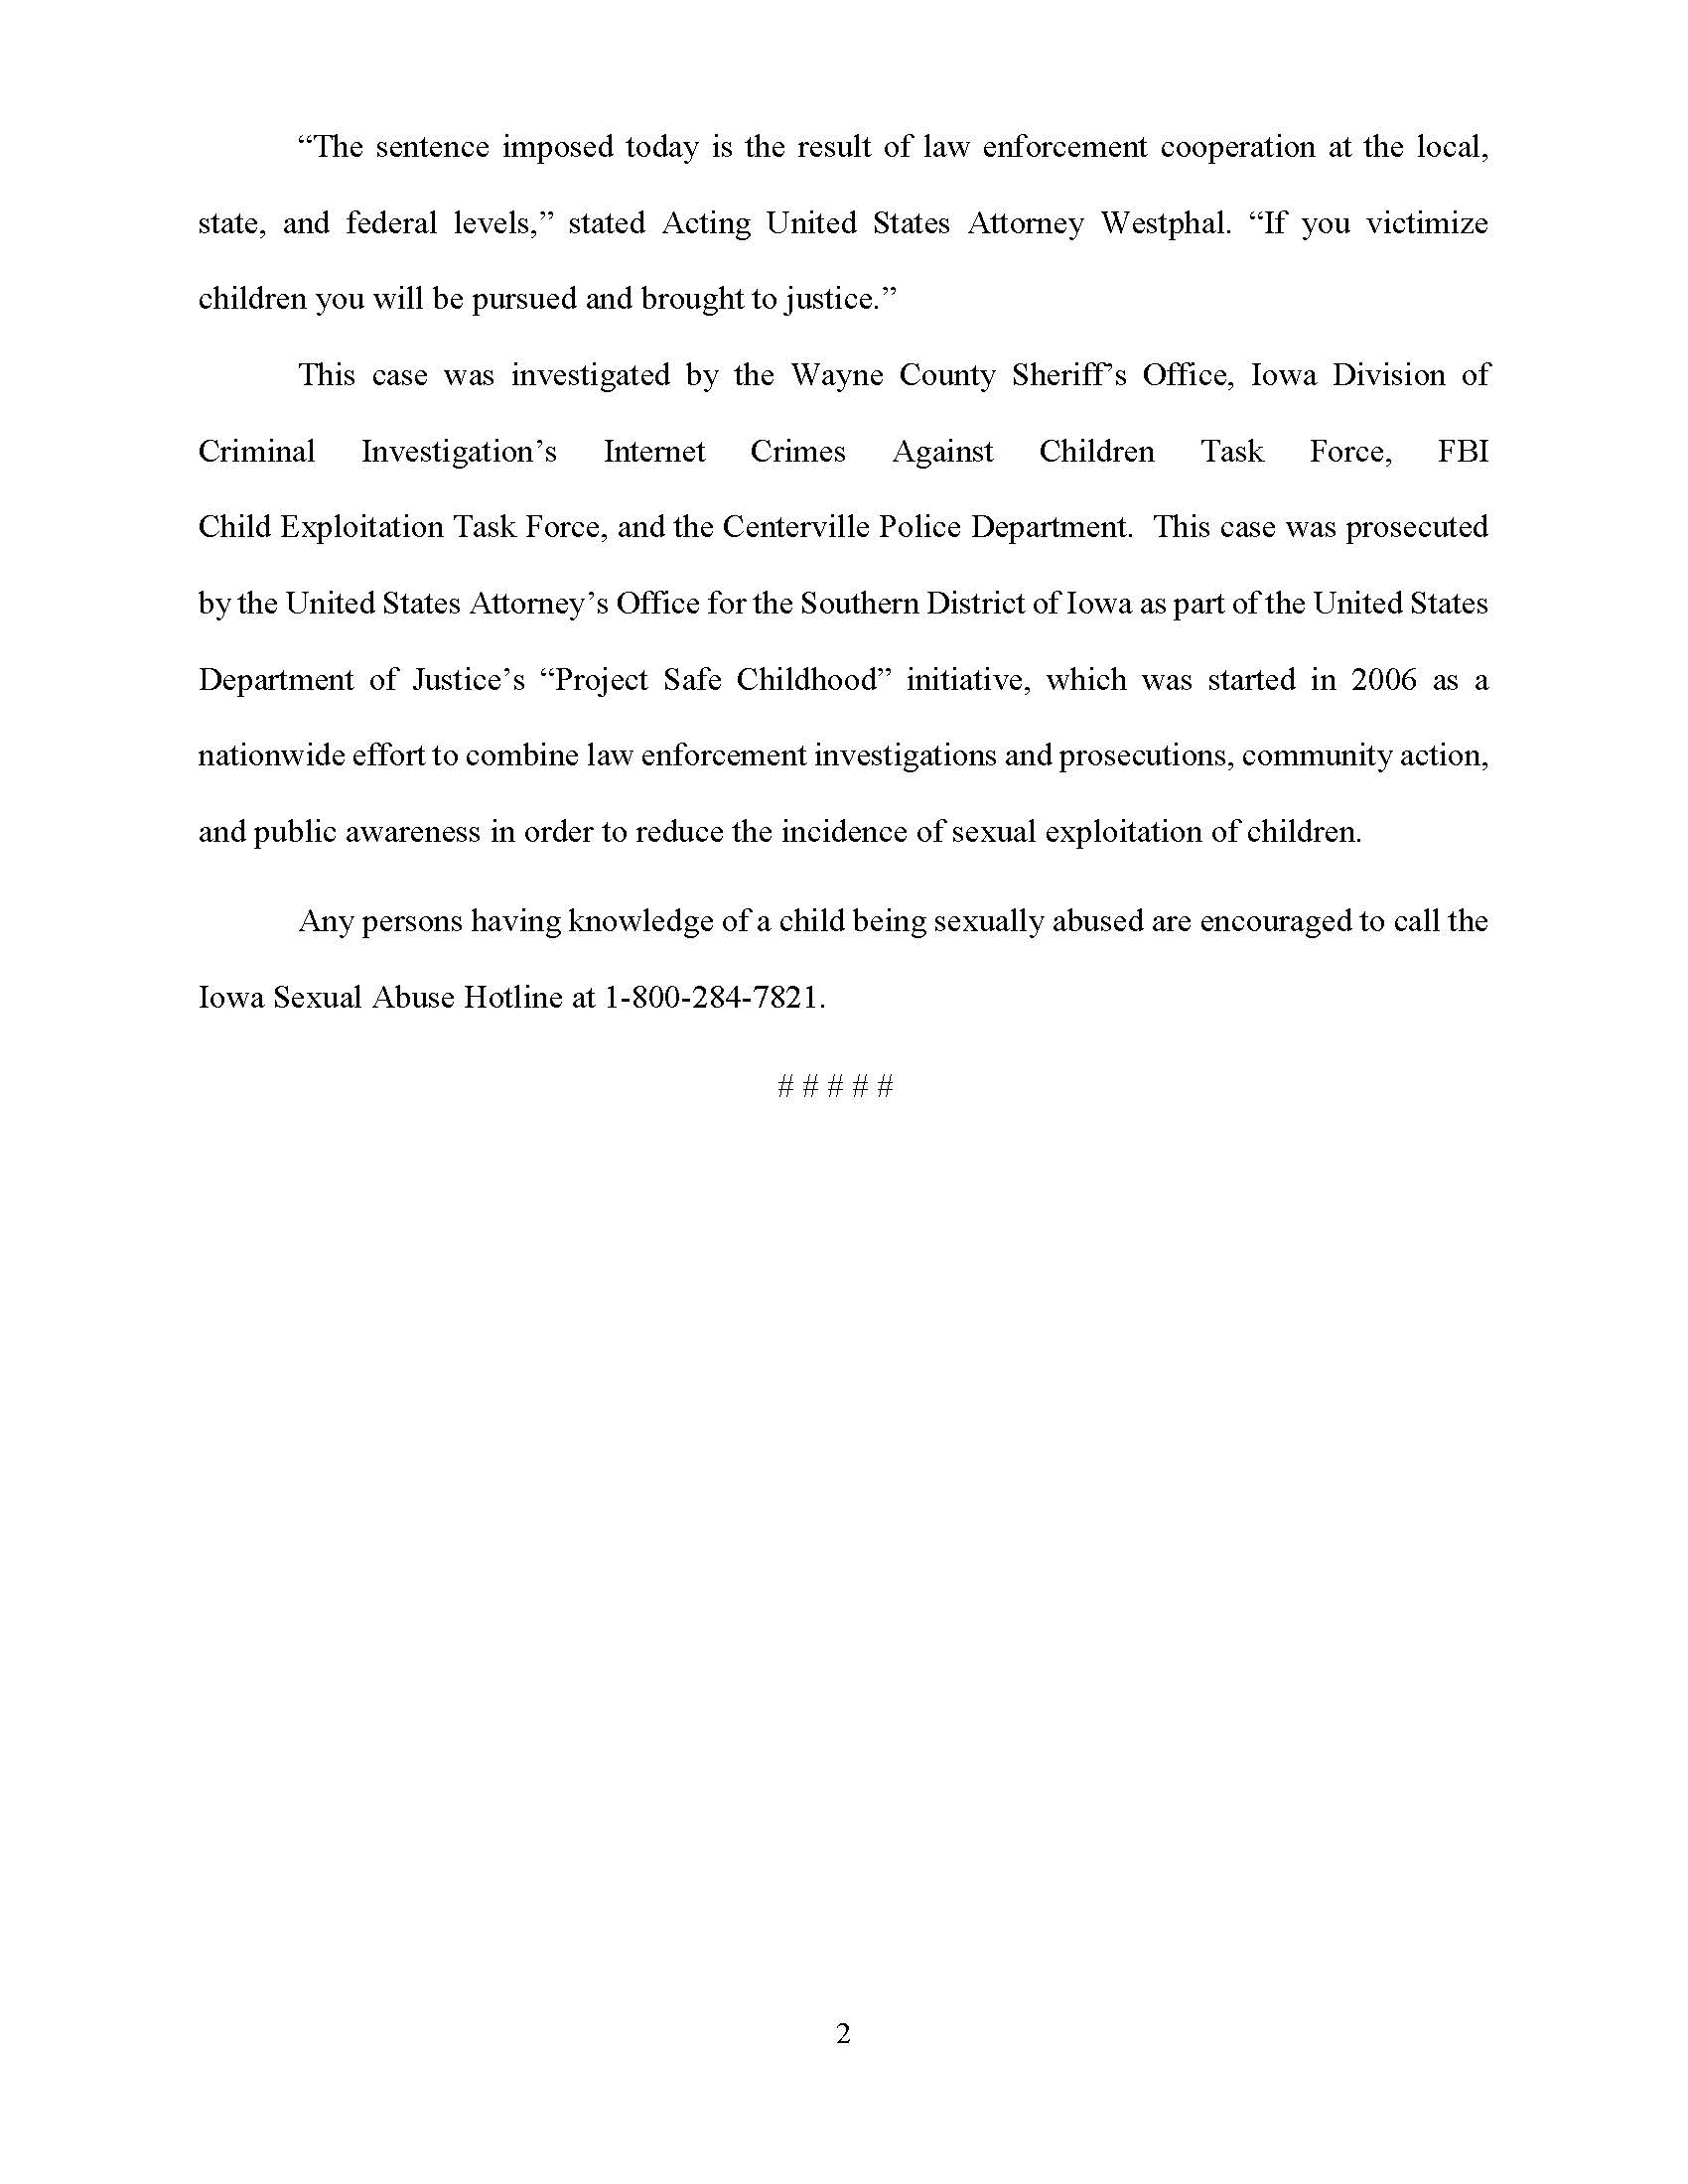 Link to page 2 of Ryan Ford press release